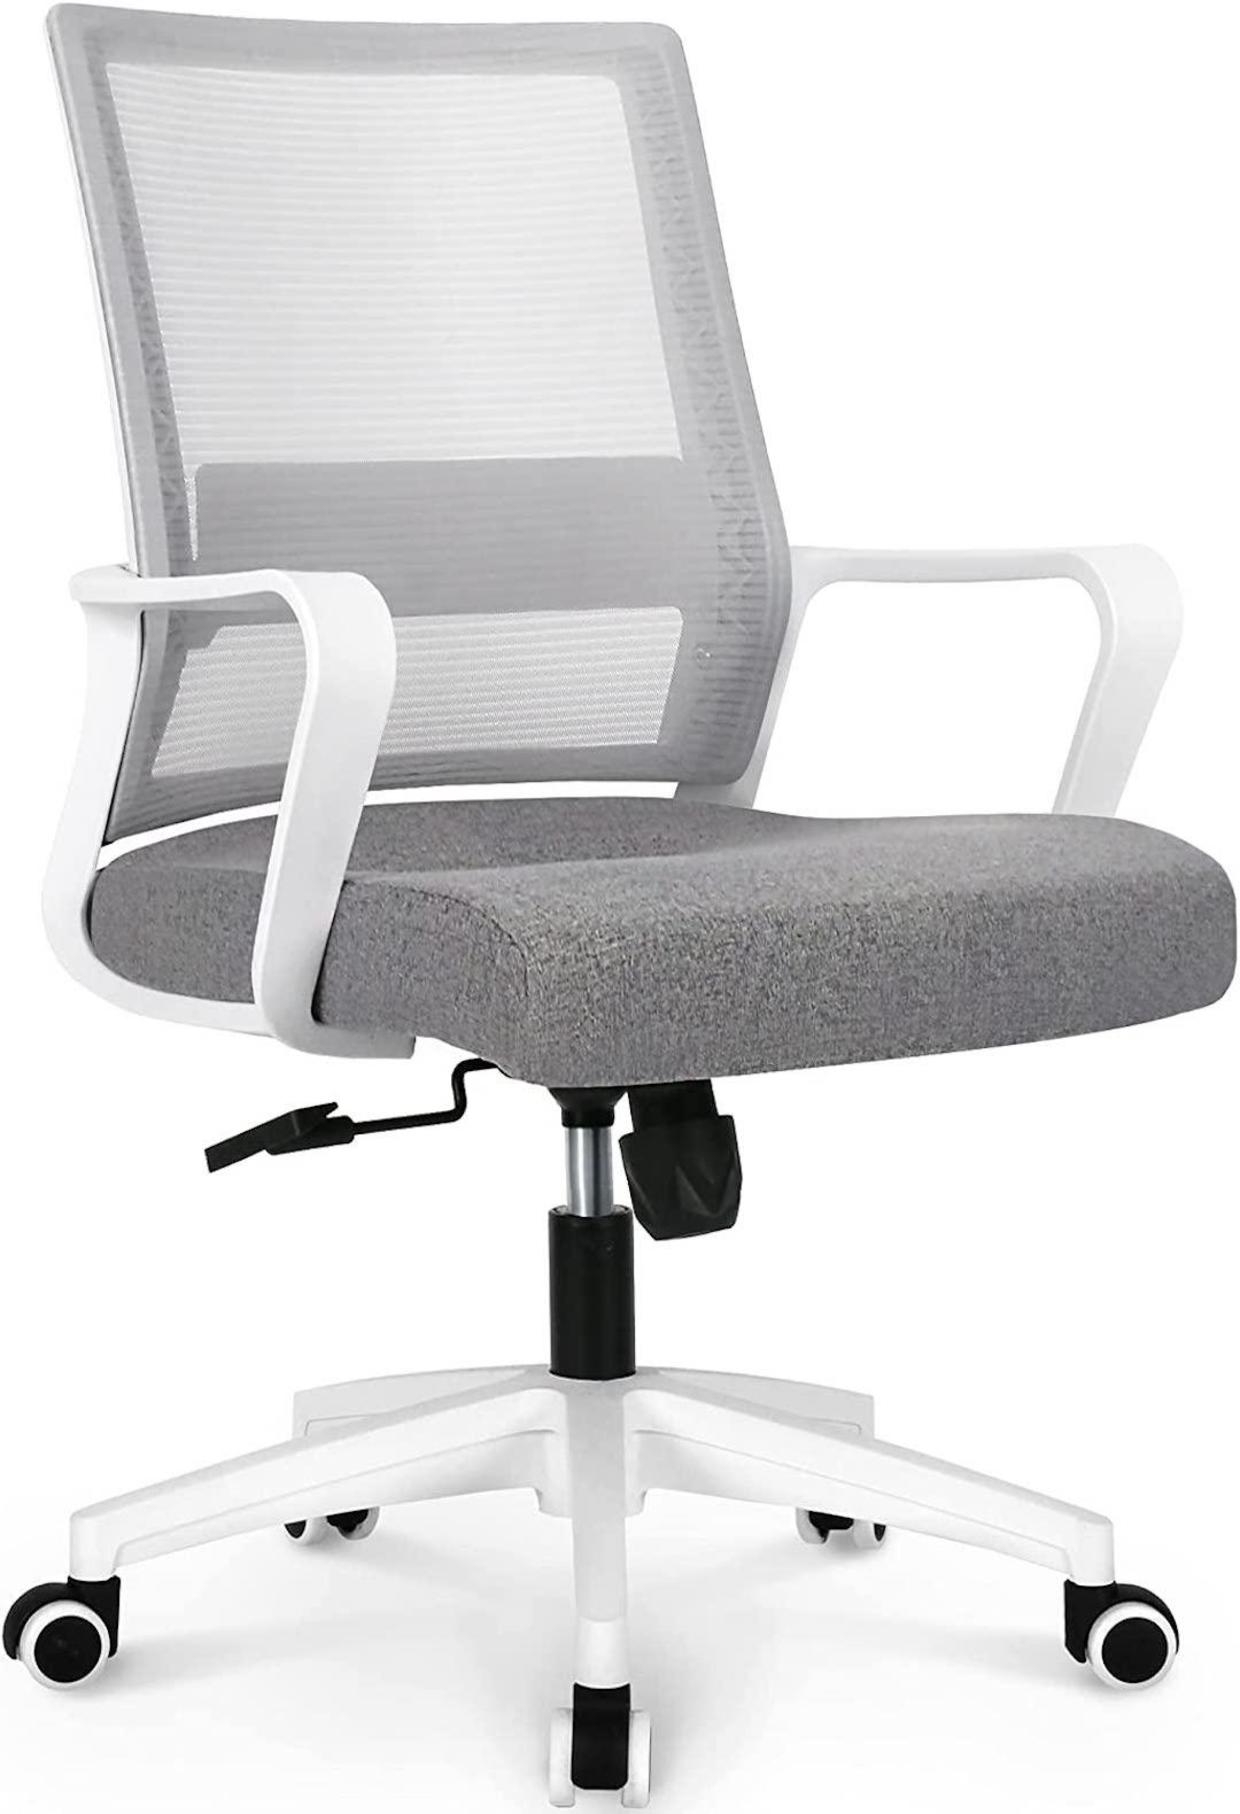 9 super comfy ergonomic office chairs for your home office - CBS News